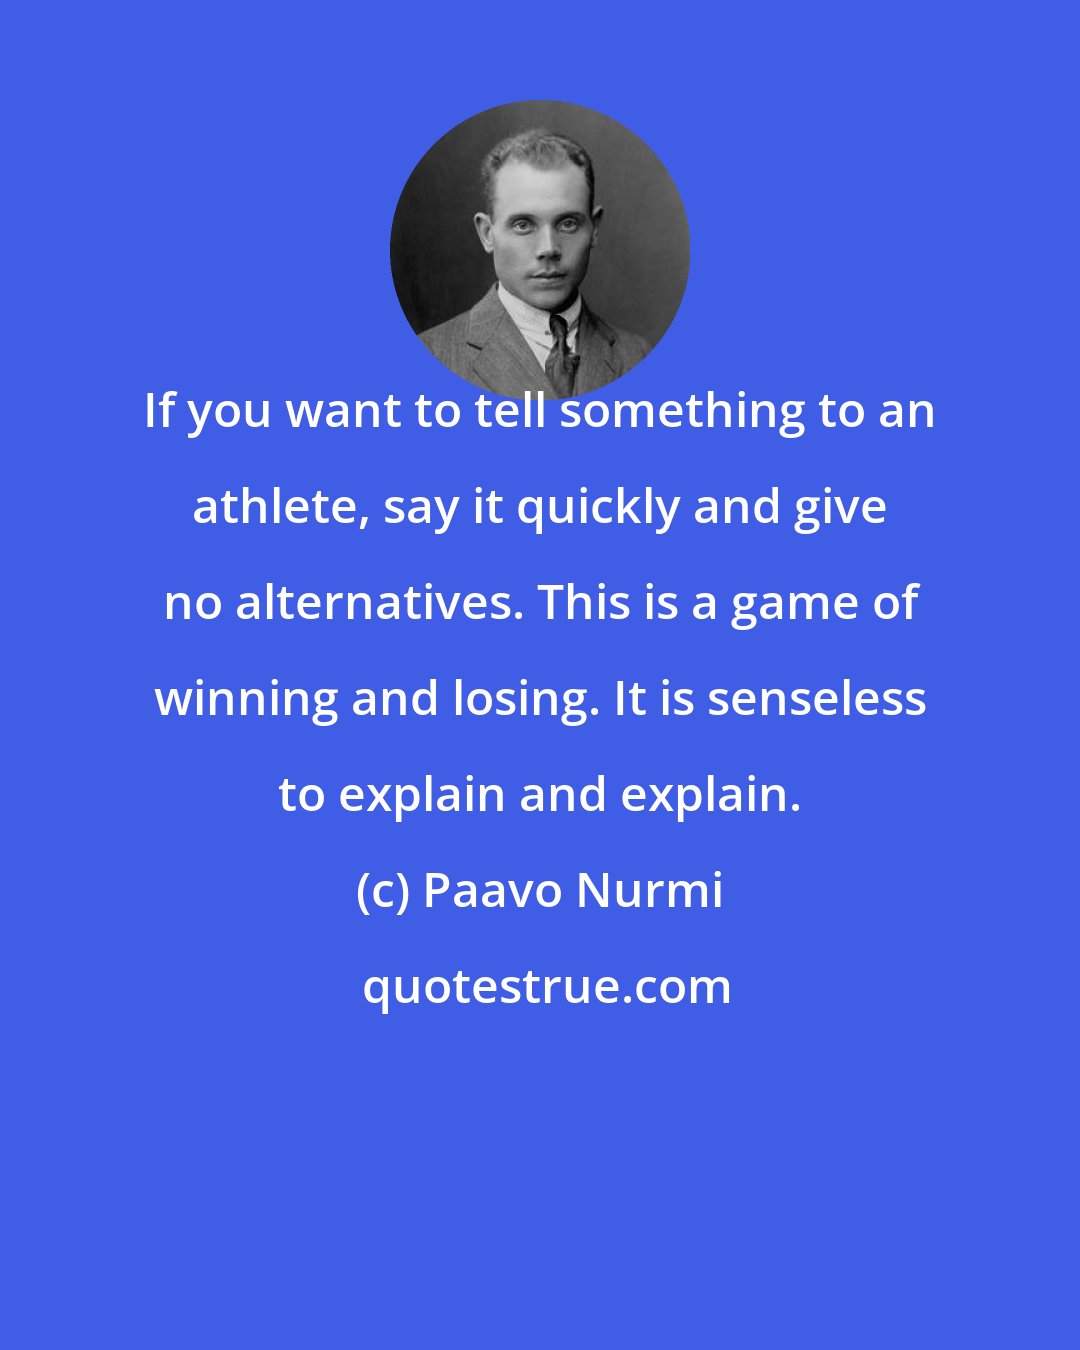 Paavo Nurmi: If you want to tell something to an athlete, say it quickly and give no alternatives. This is a game of winning and losing. It is senseless to explain and explain.